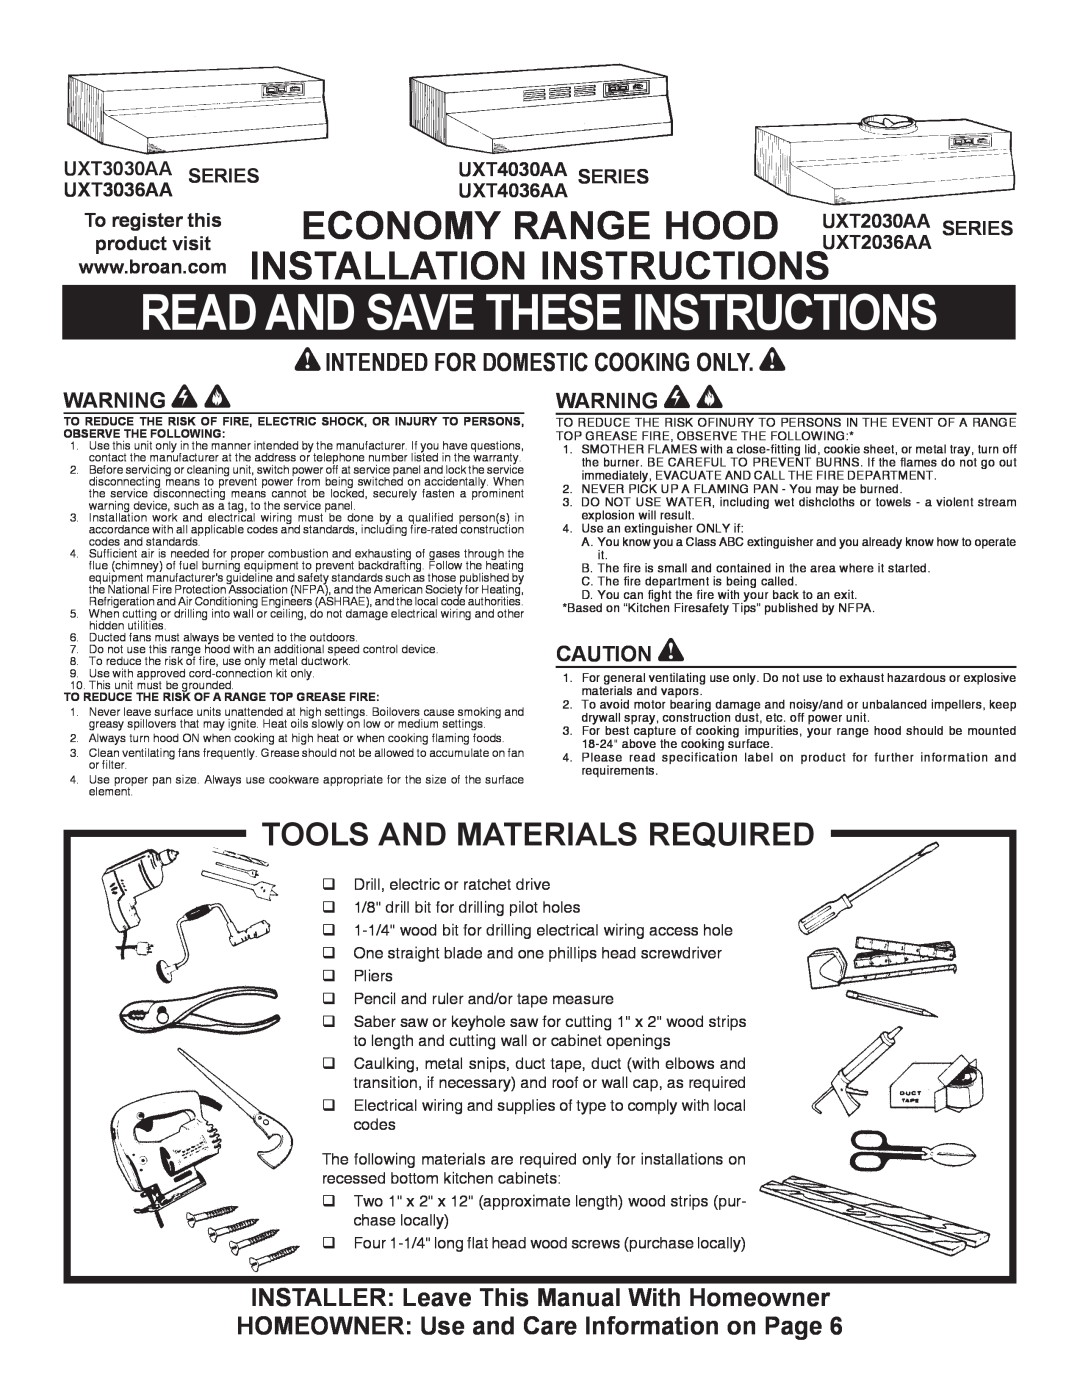 Whirlpool UXT2030AA installation instructions product visit, To register this, Read And Save These Instructions, UXT4030AA 